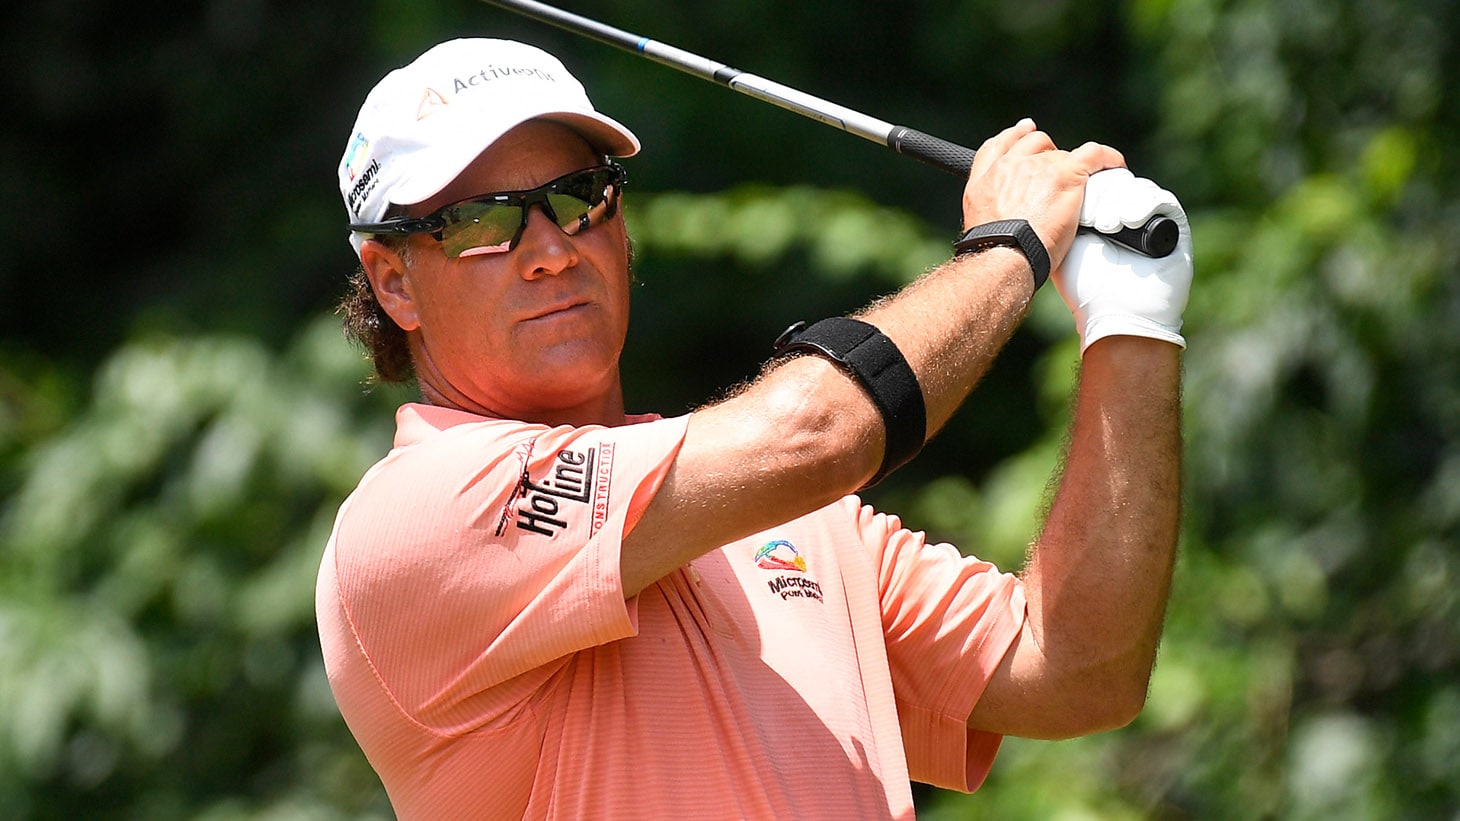 A Major First for Scott McCarron at the Senior Players - Team Titleist